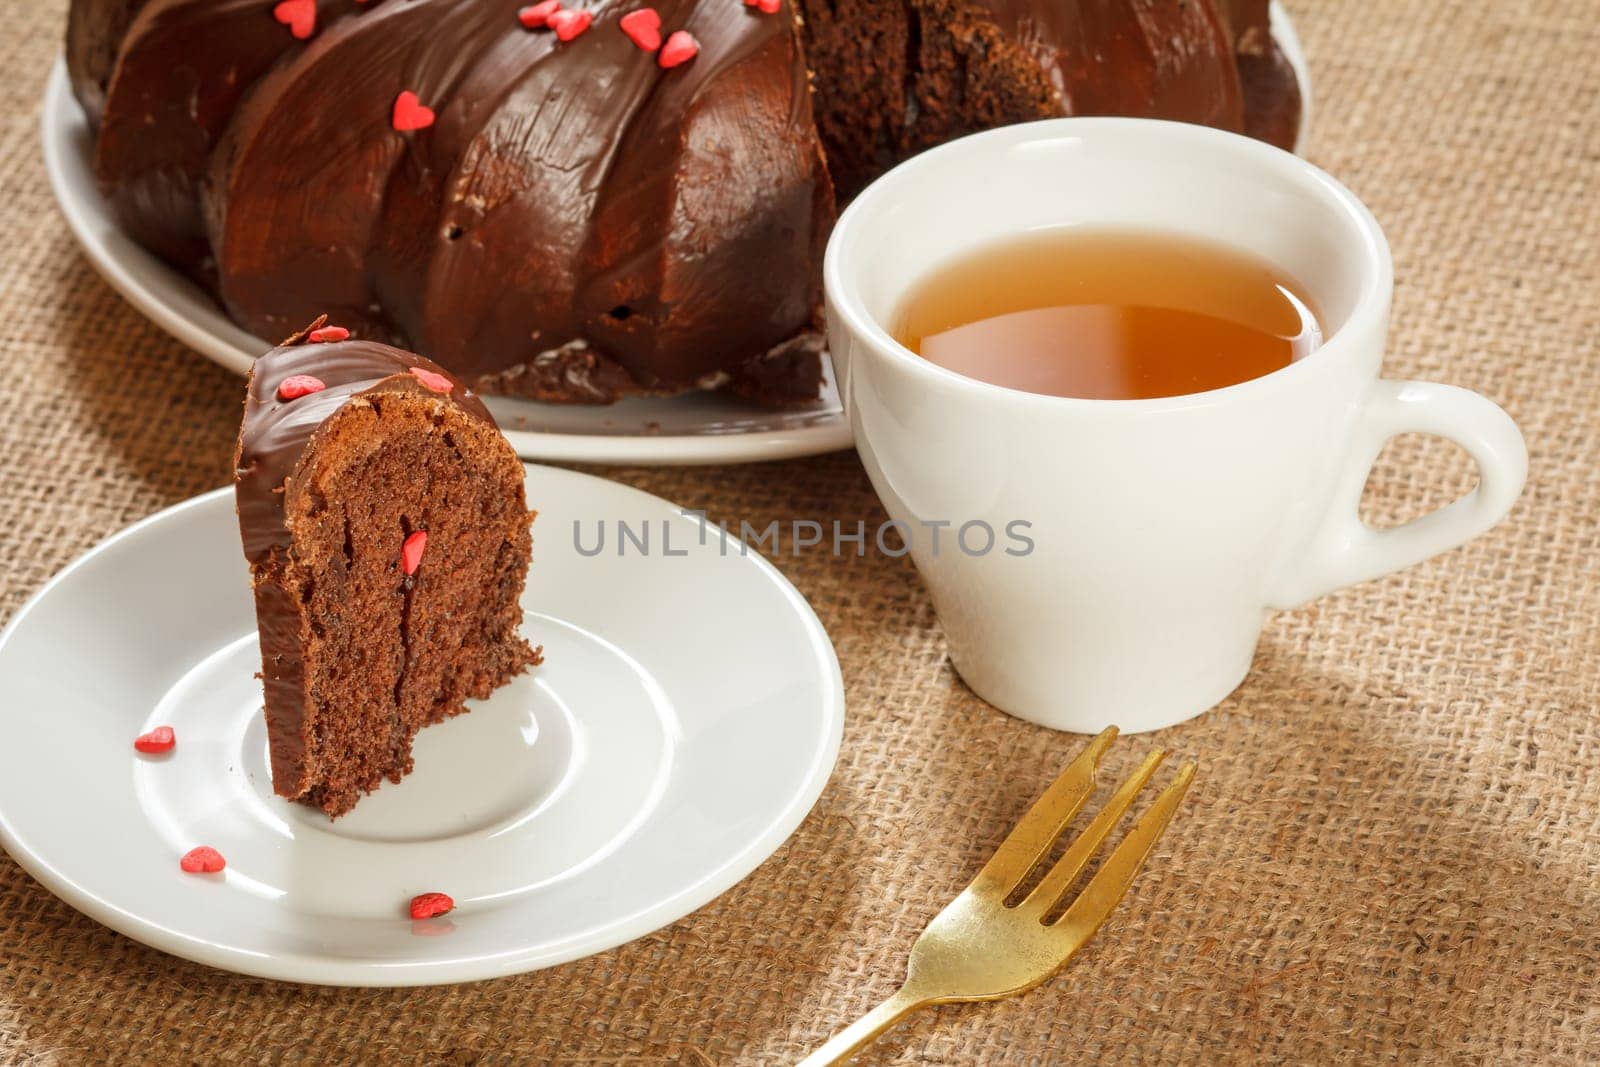 Slice of delicious homemade chocolate cake decorated with small hearts made of caramel on saucer, fork and a cup of tea on table with sackcloth.